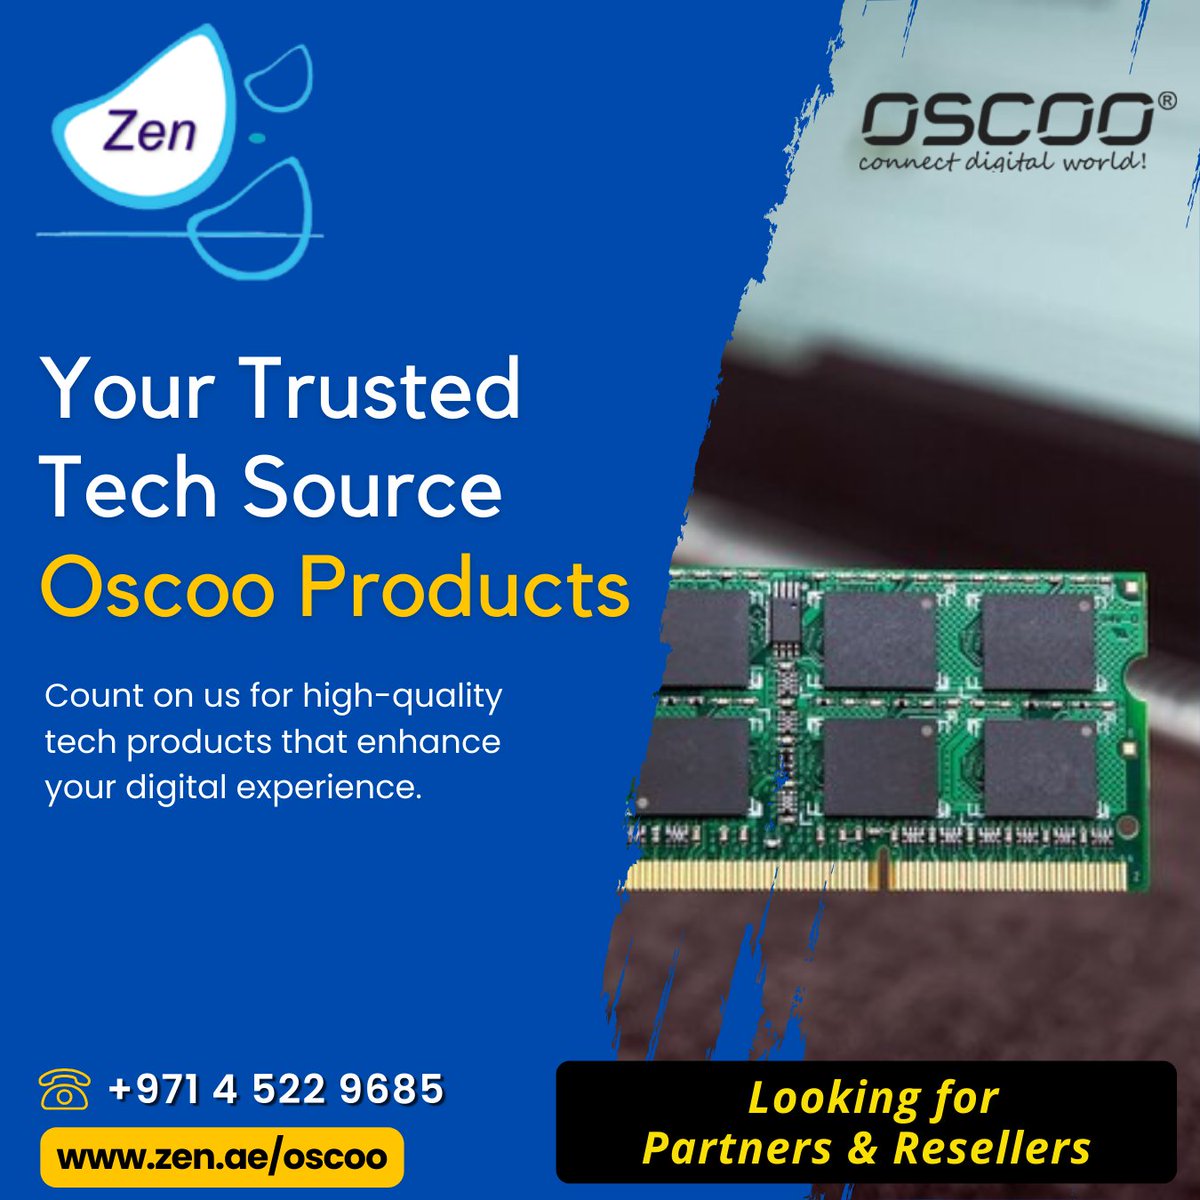 #oscoo Discover Oscoo - your trusted source for top-tier tech products and accessories.
Looking for partners & resellers.

smpl.is/8kyp5

#3cx #zenitdxb #zenit #businesscommunication #dubaistartup #3cxhosting #simhosting #saudistartups